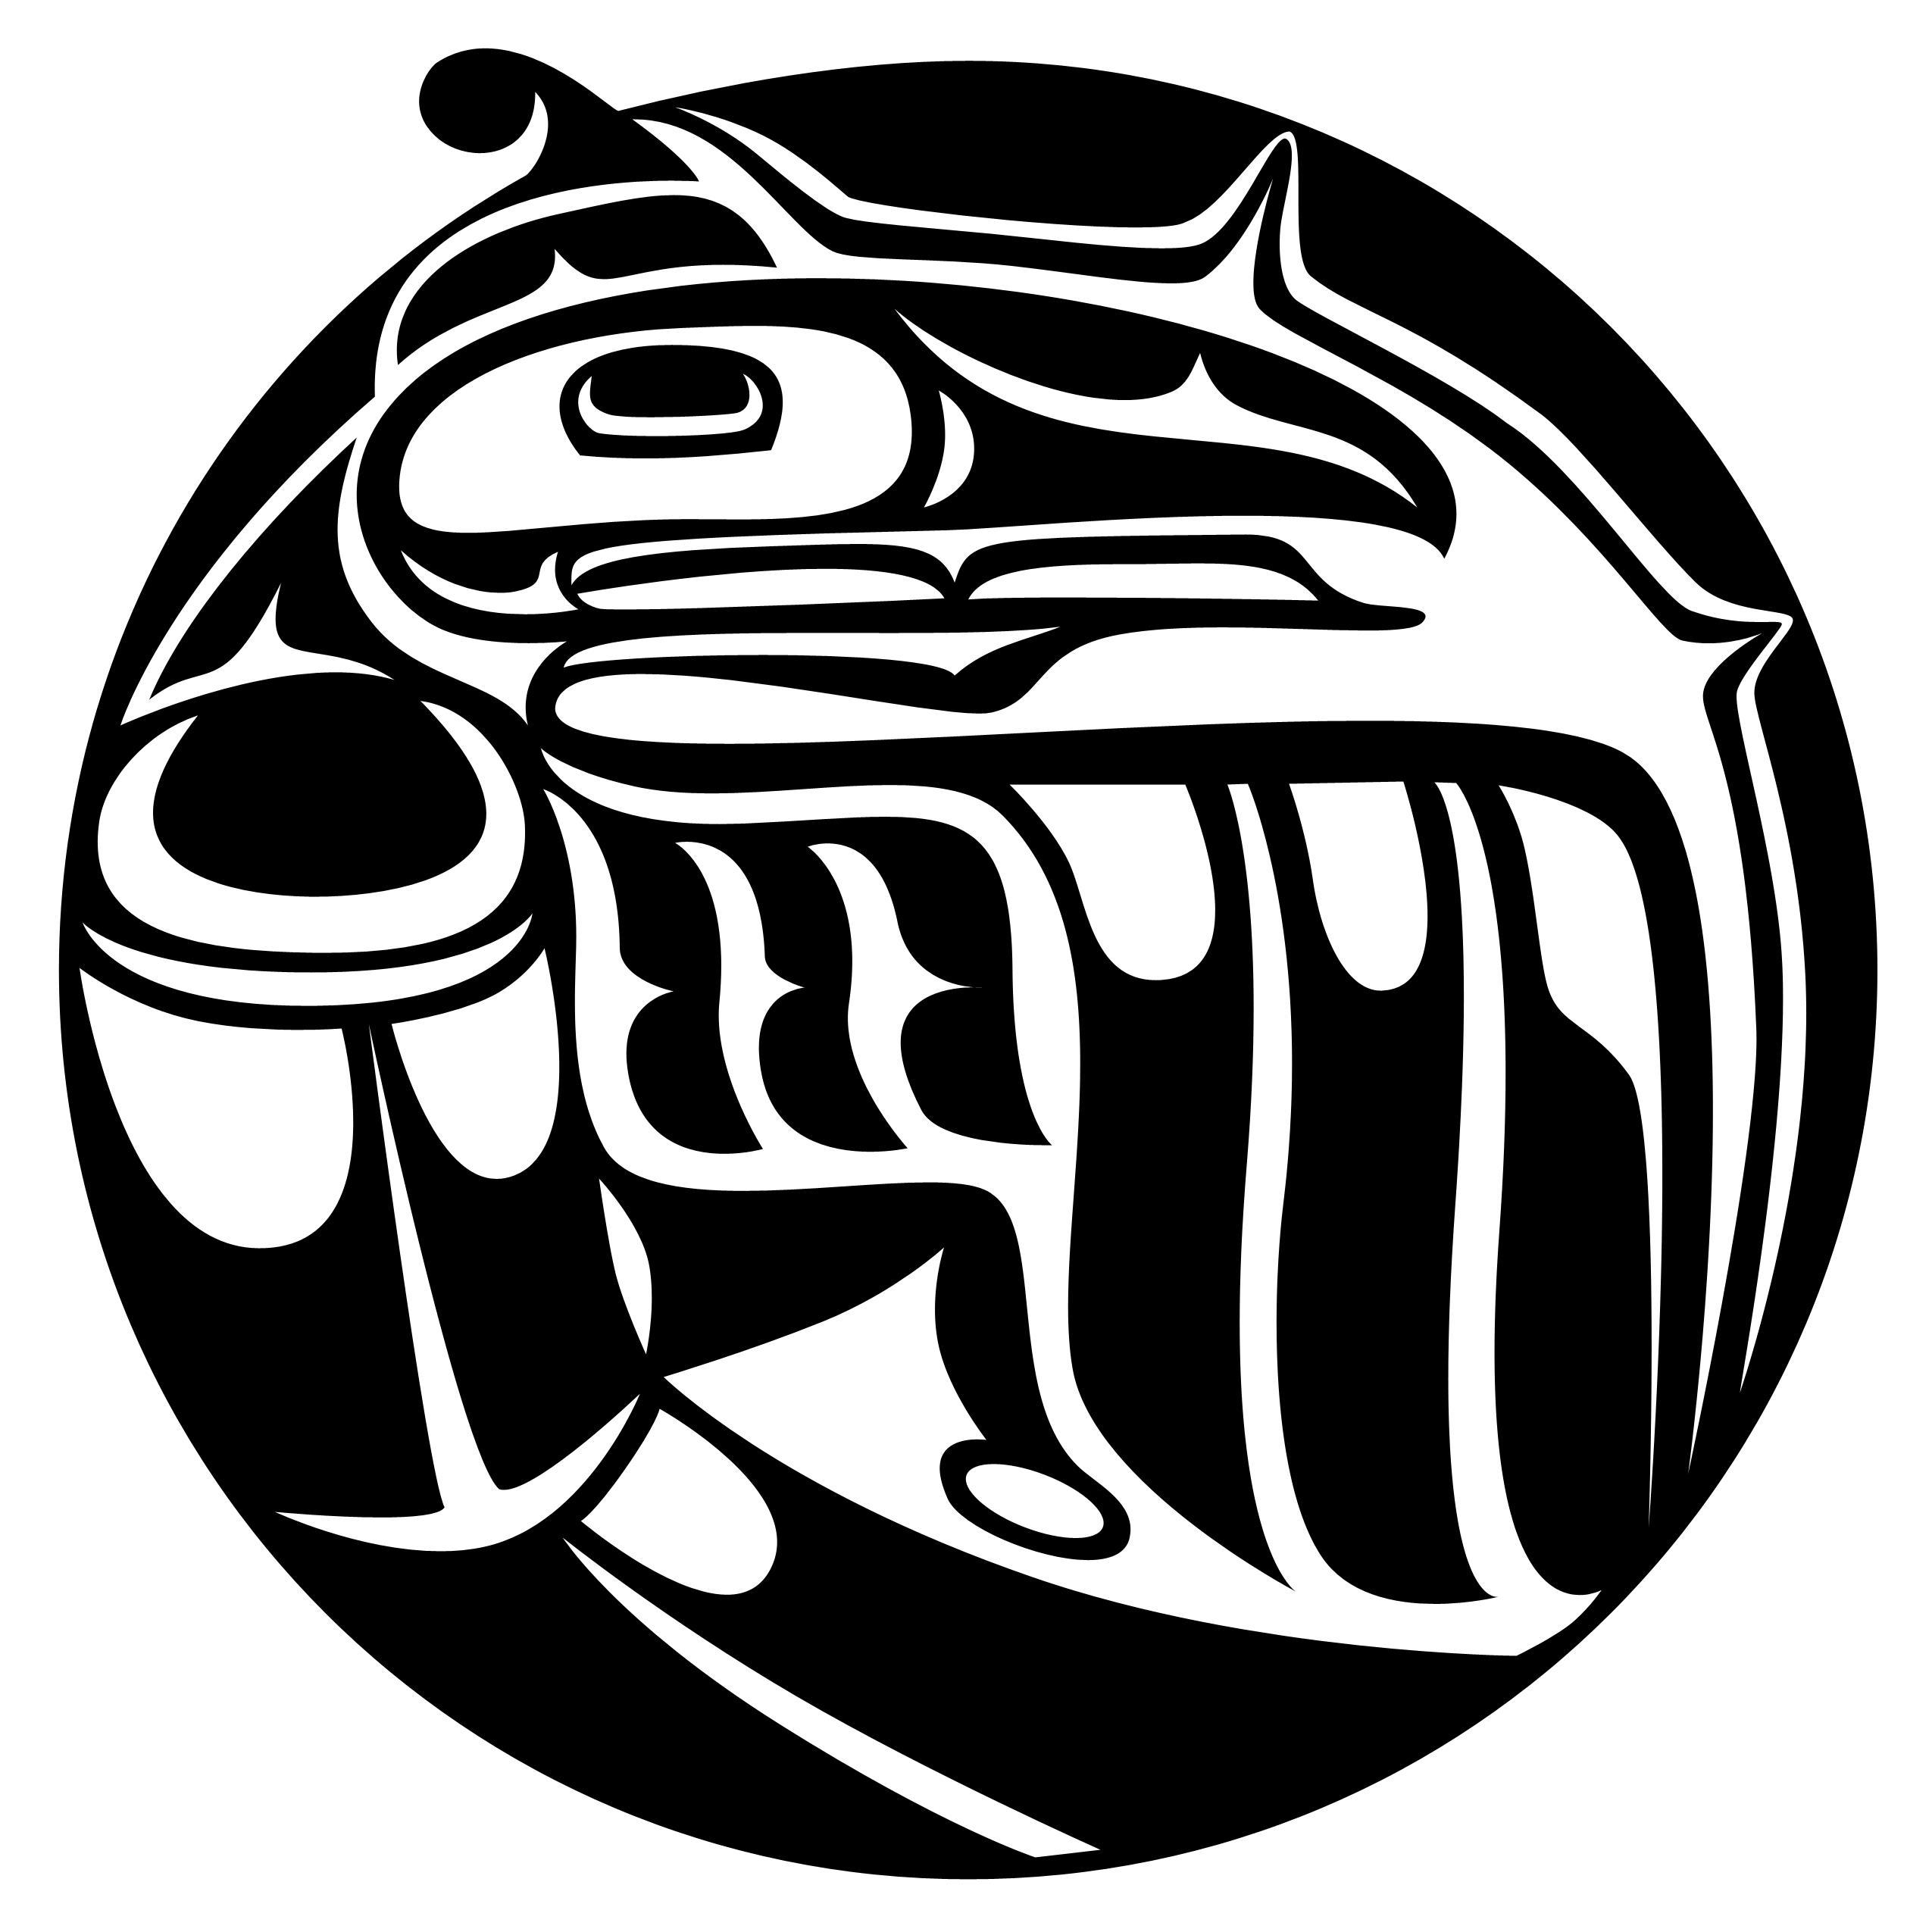 Qqs Projects is a Heiltsuk-driven non-profit in the heart of the Great Bear Rainforest. We specialize in building capacity for cultural and natural stewardship.